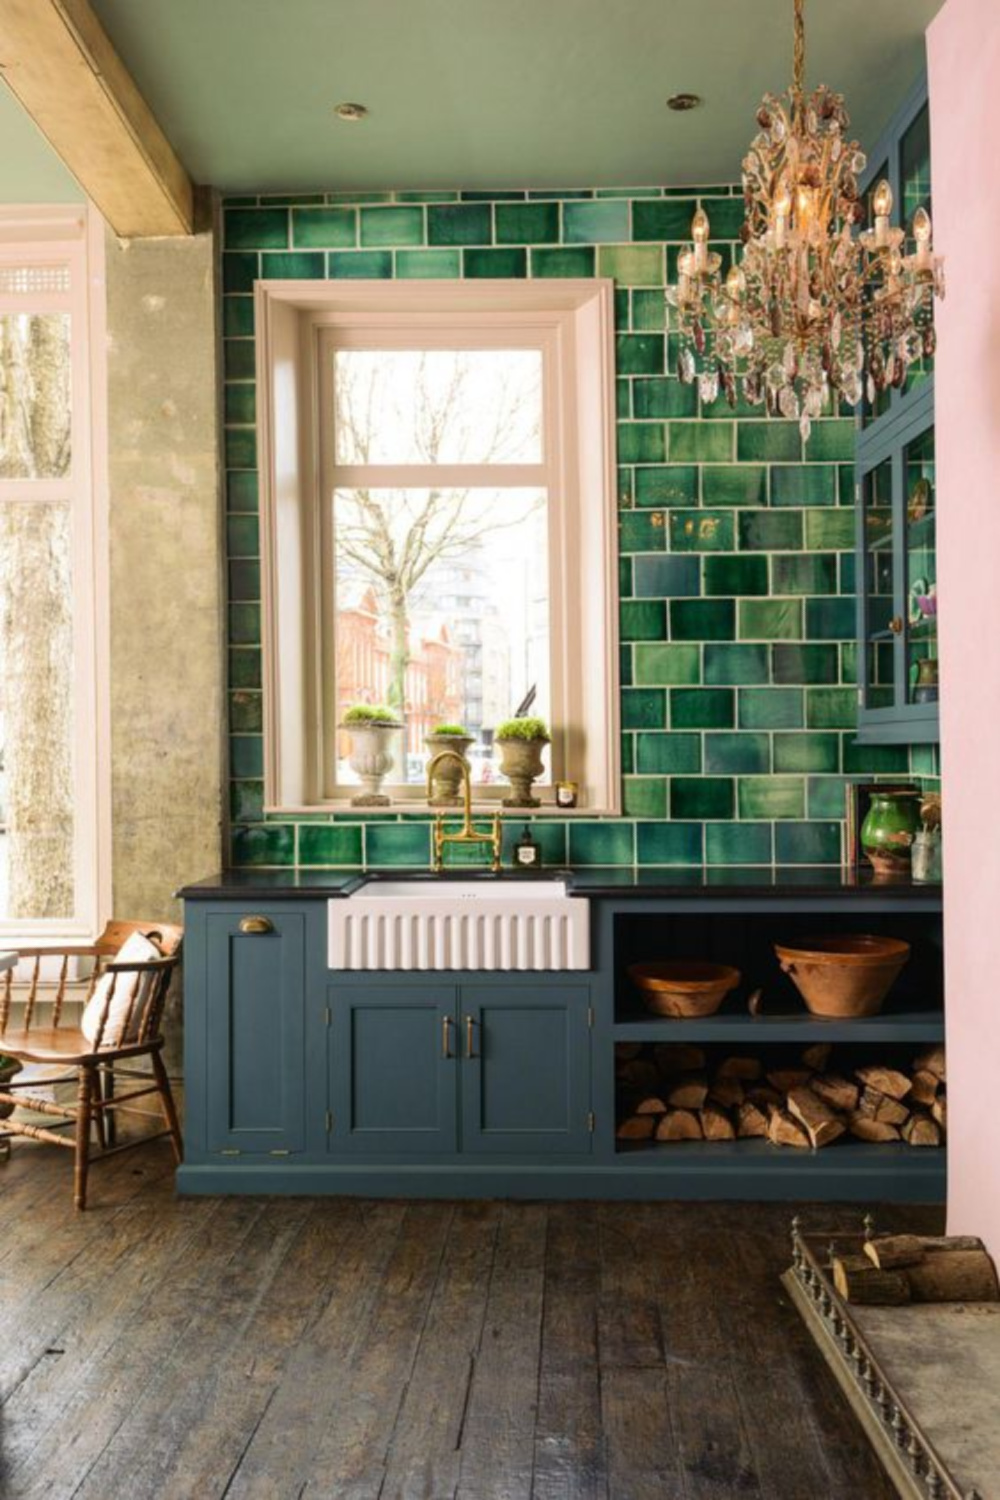 Gorgeous blue kitchen with English country charm by deVOL kitchens. Amazing green glazed handmade tile backsplash. Clerkenwell blue painted cabinetry.